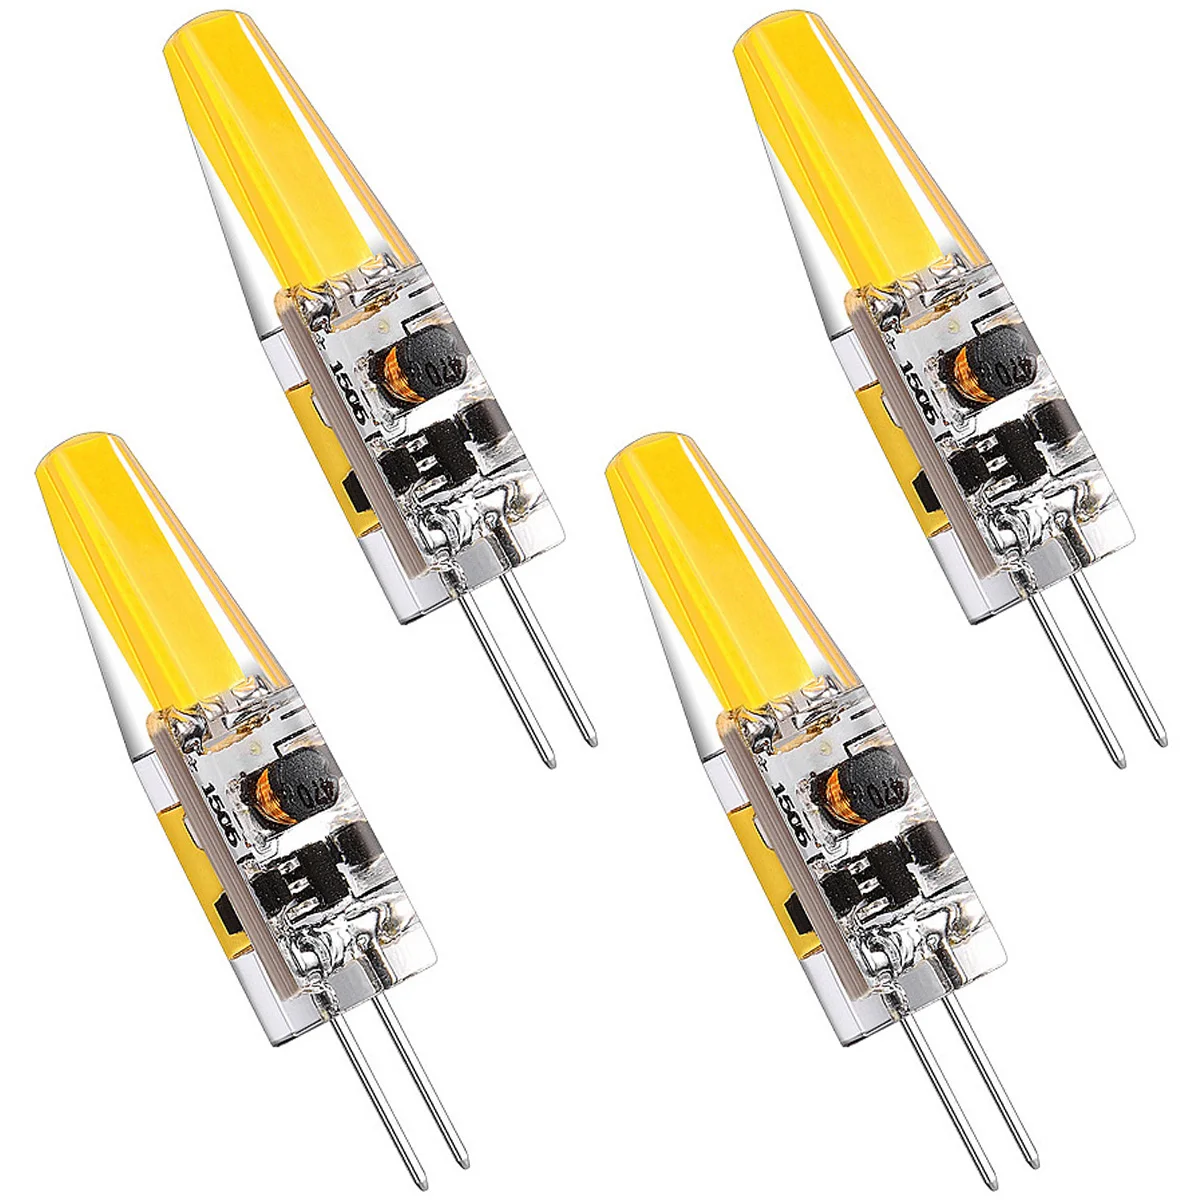 4 PCS Dimmable Mini G4 LED COB Lamp 6W Bulb AC DC 12V 220V Candle Lights Replace 30W 40W Halogen for Chandelier Spotlight